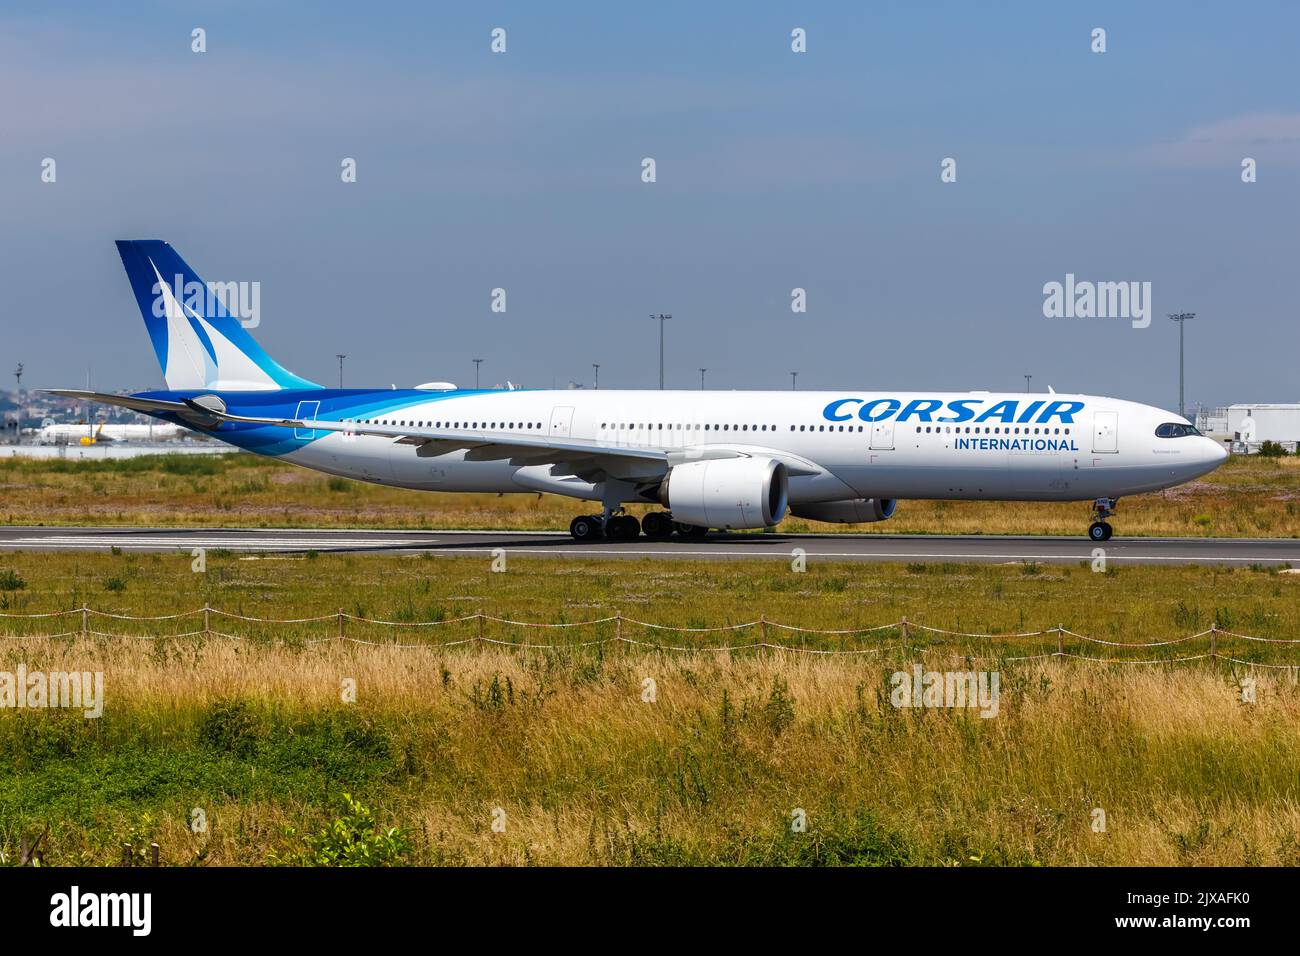 Paris, France - June 4, 2022: Corsair International Airbus A330-900neo airplane at Paris Orly airport (ORY) in France. Stock Photo